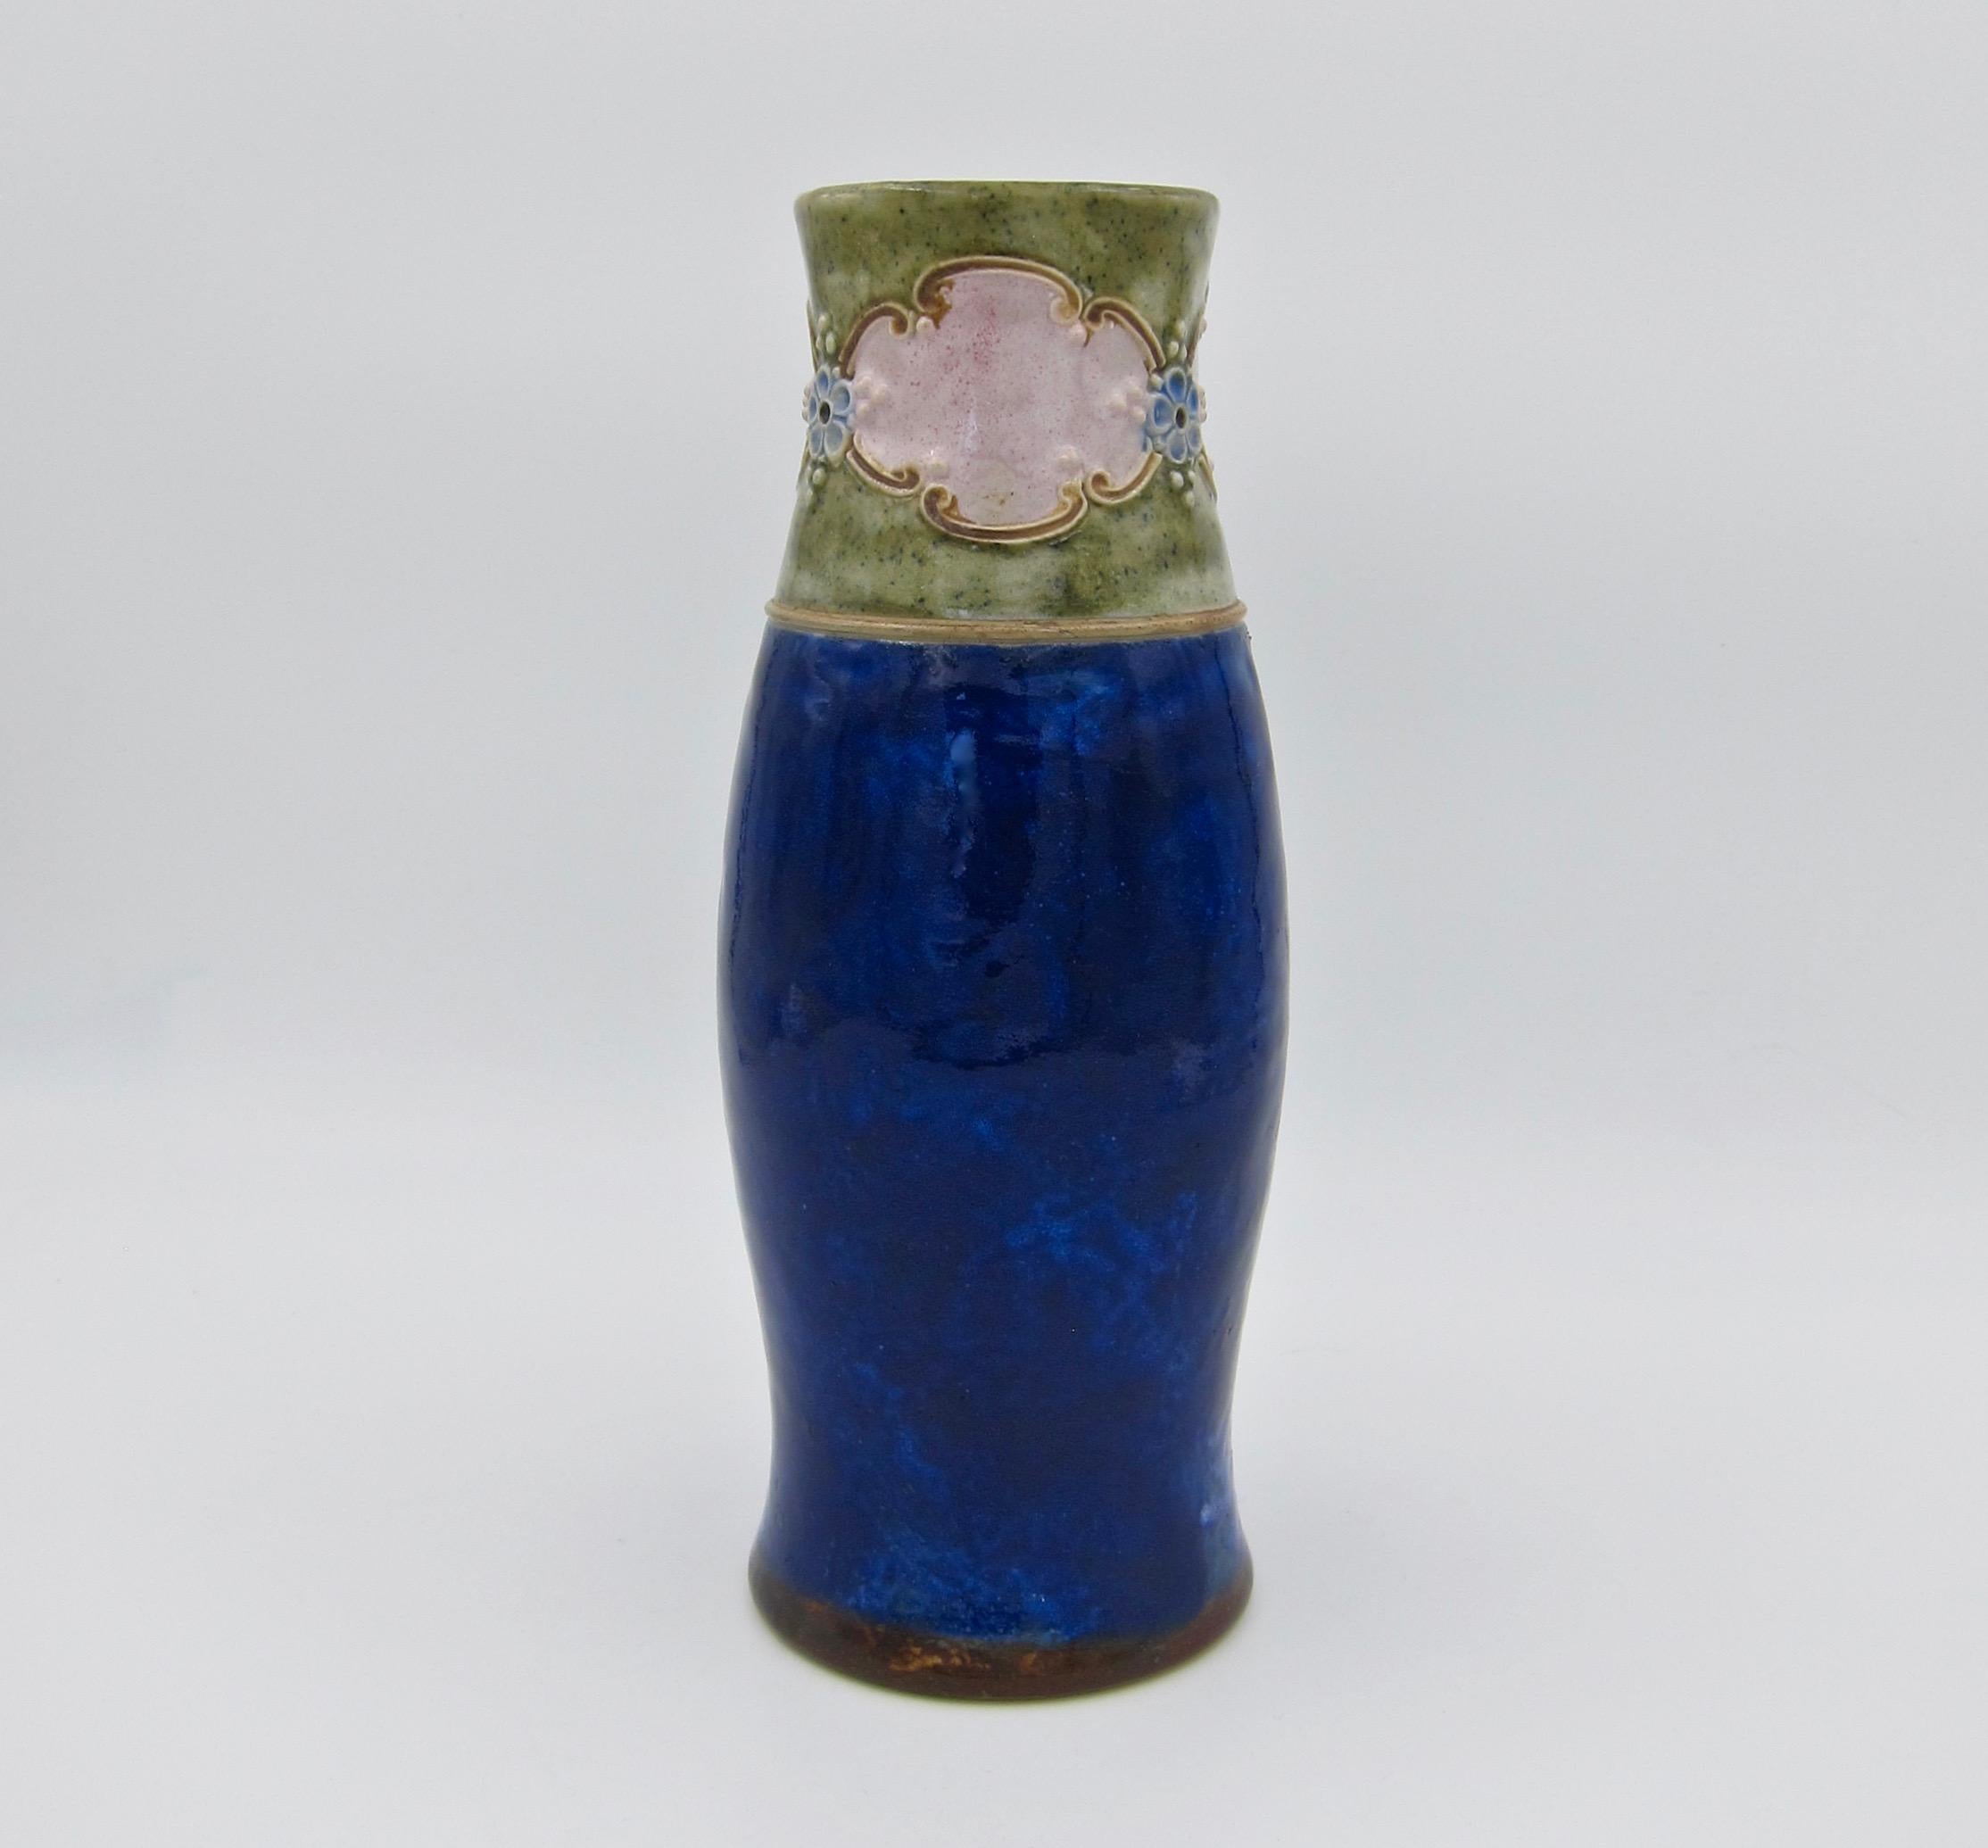 An early 20th century cylindrical stoneware vase from Royal Doulton of England, date marked for the period between 1902-1922. The vessel is hand-decorated in the Art Nouveau style; the upper part of the vase features relief moulded blue flowers